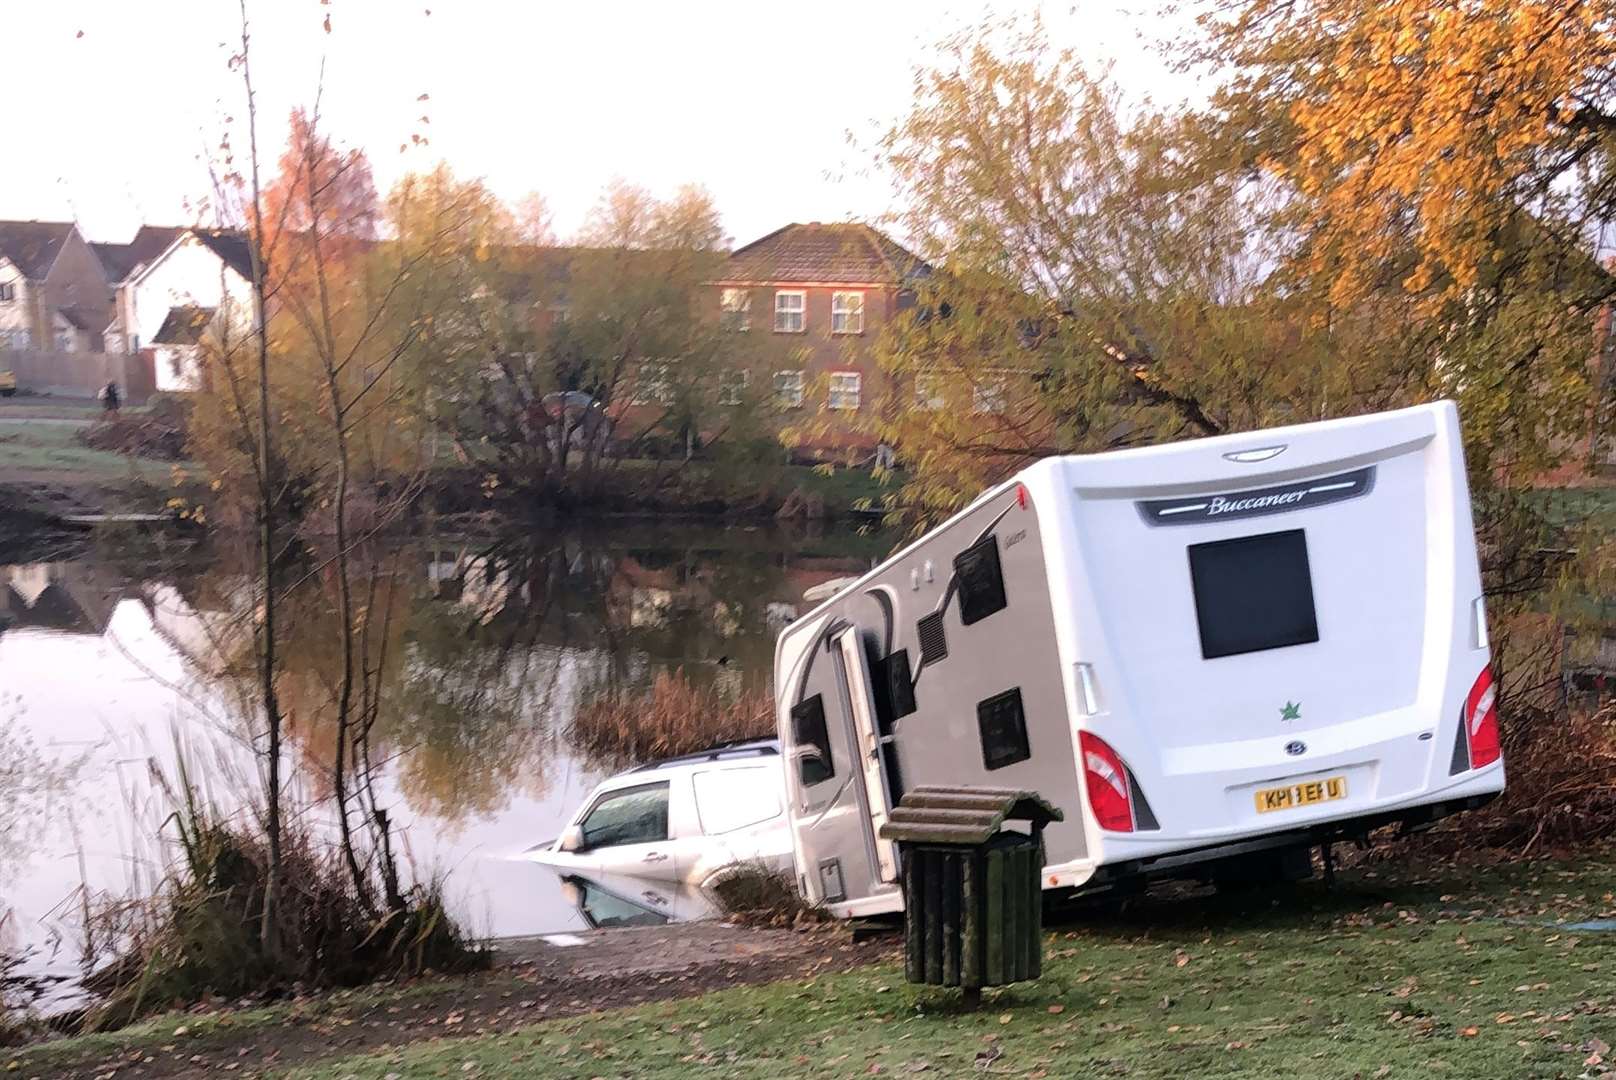 A 4X4 towing a caravan ended up in the lake off Newman Drive, Kemsley. Picture: James Spoerry